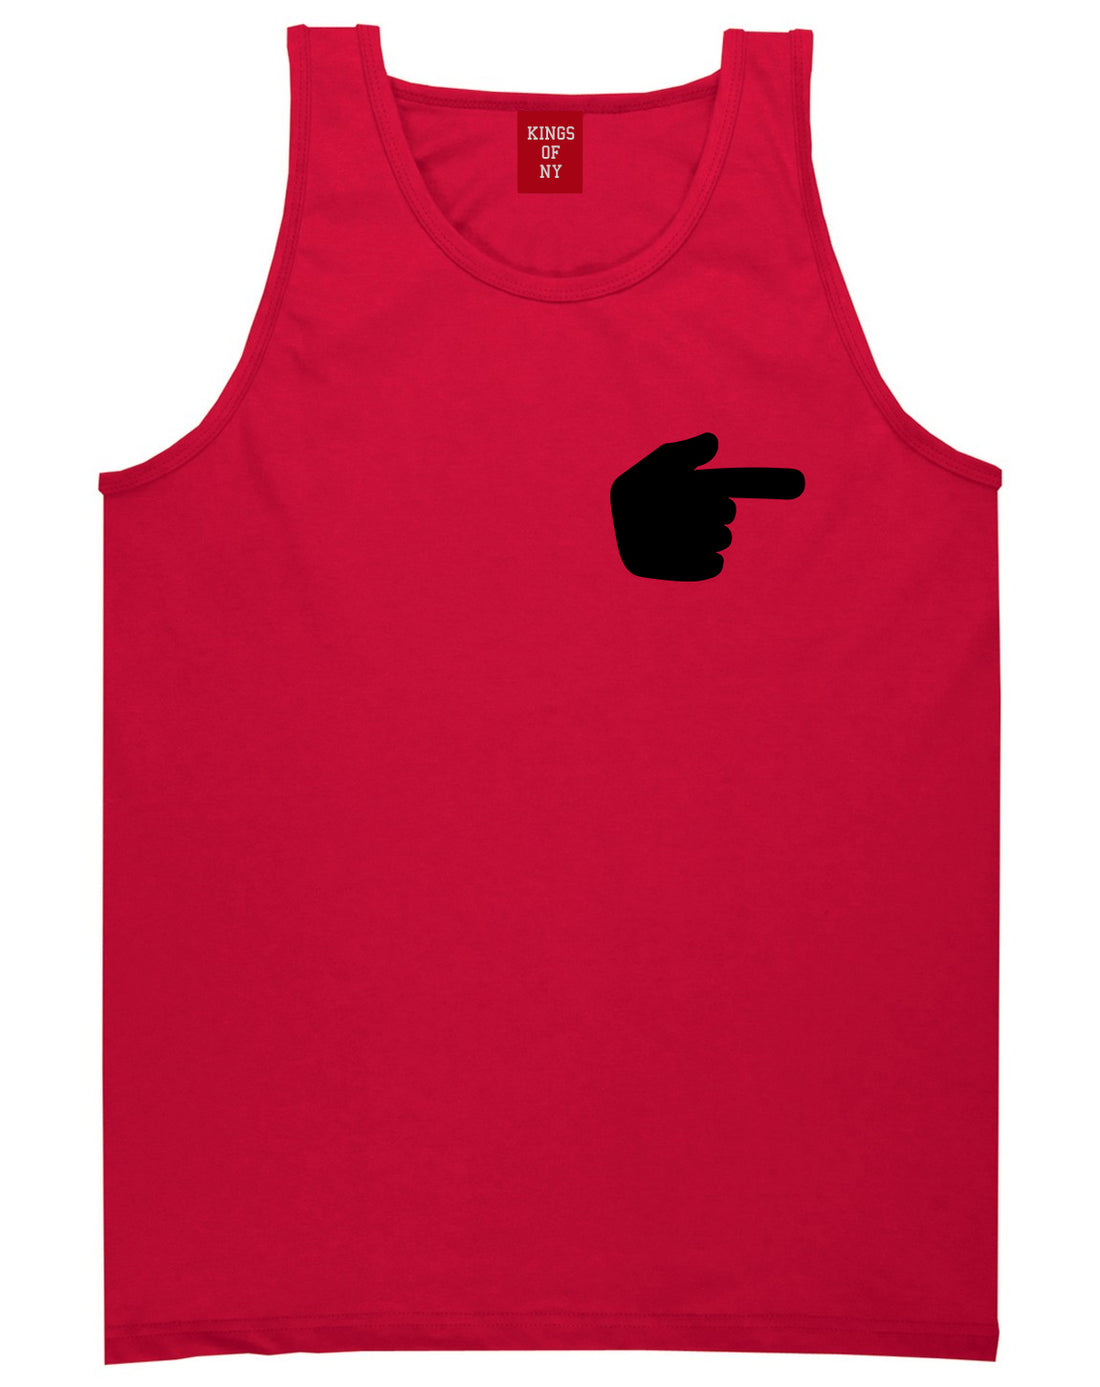 Datway_Pointing_Finger_Emoji_Chest Mens Red Tank Top Shirt by Kings Of NY